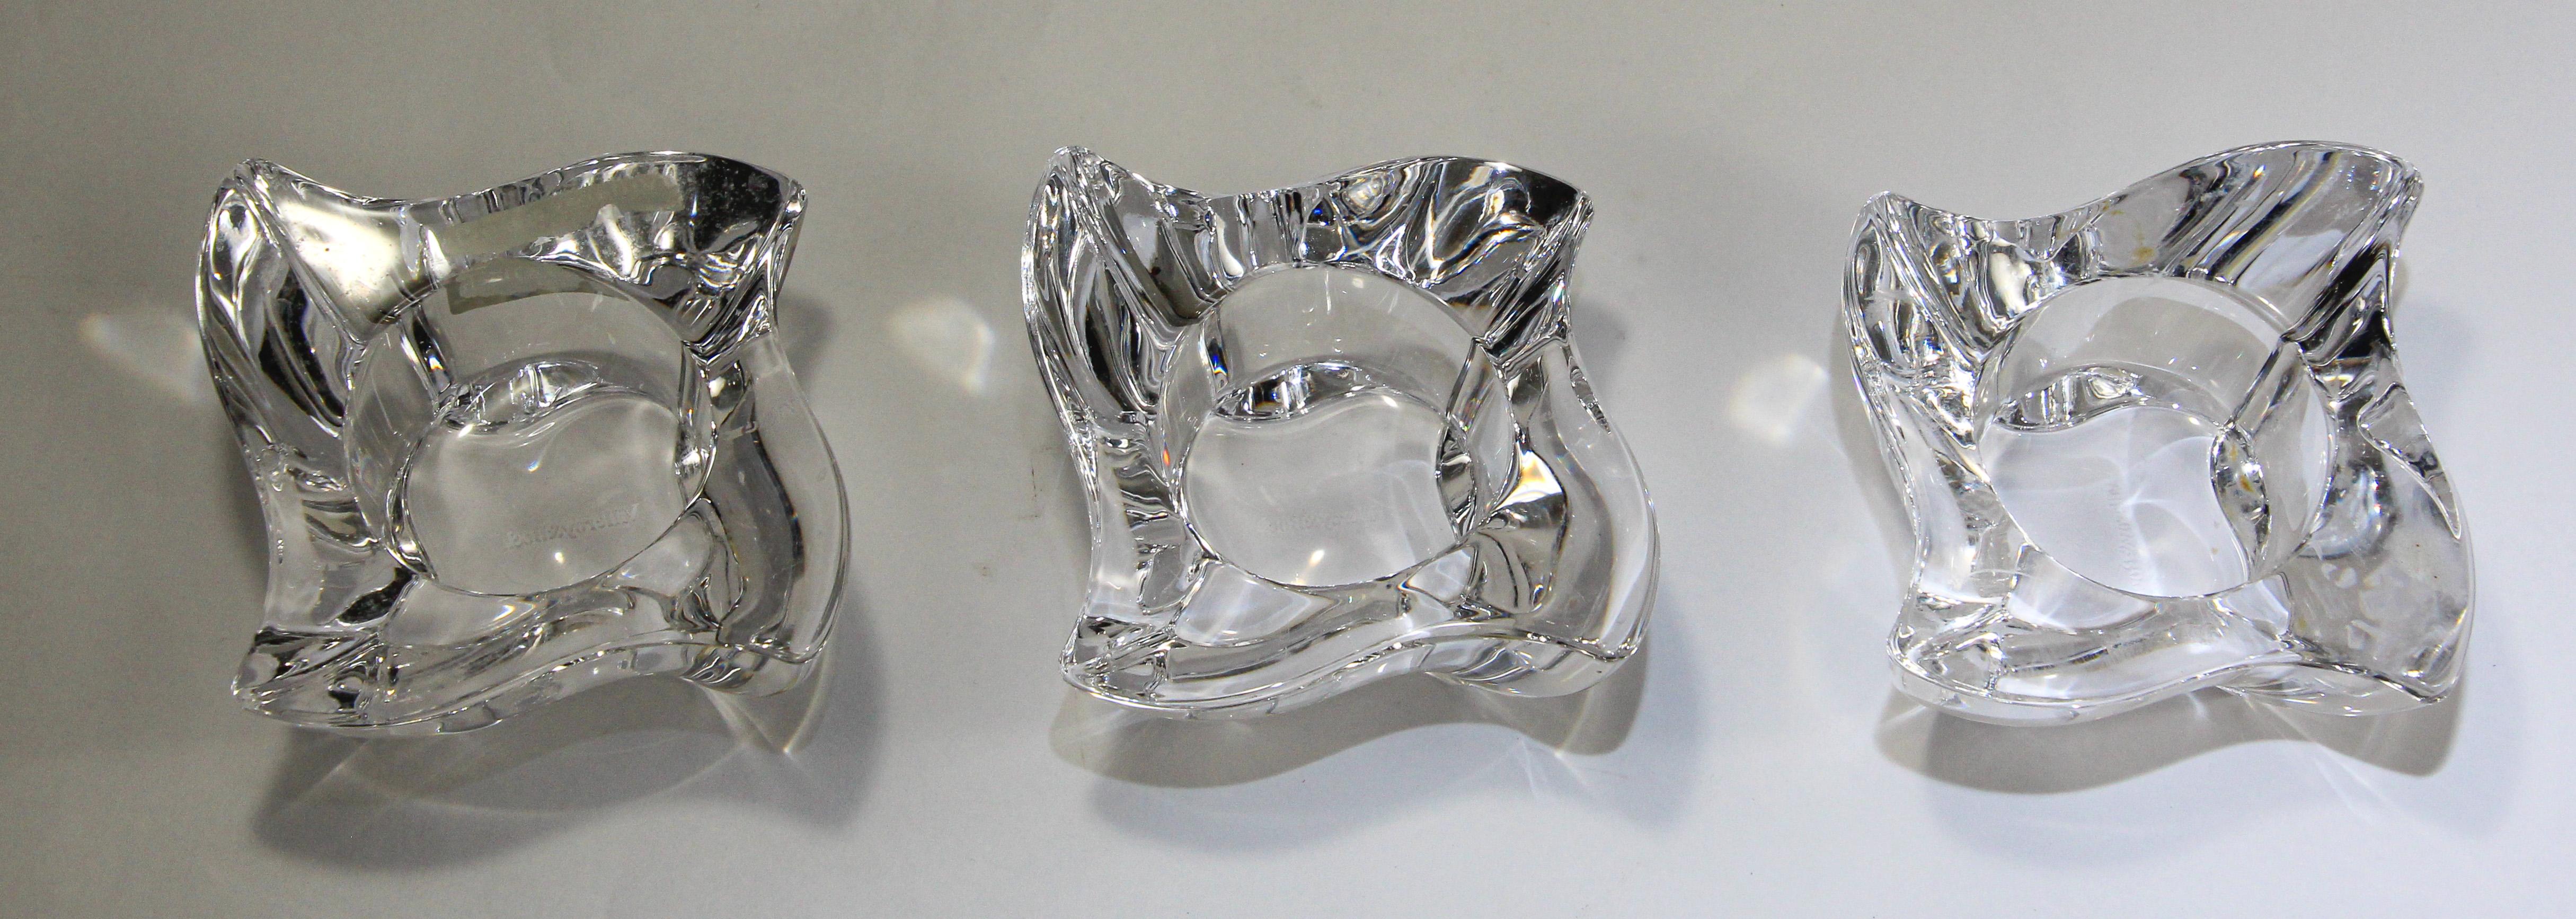 villeroy and boch crystal candle holders